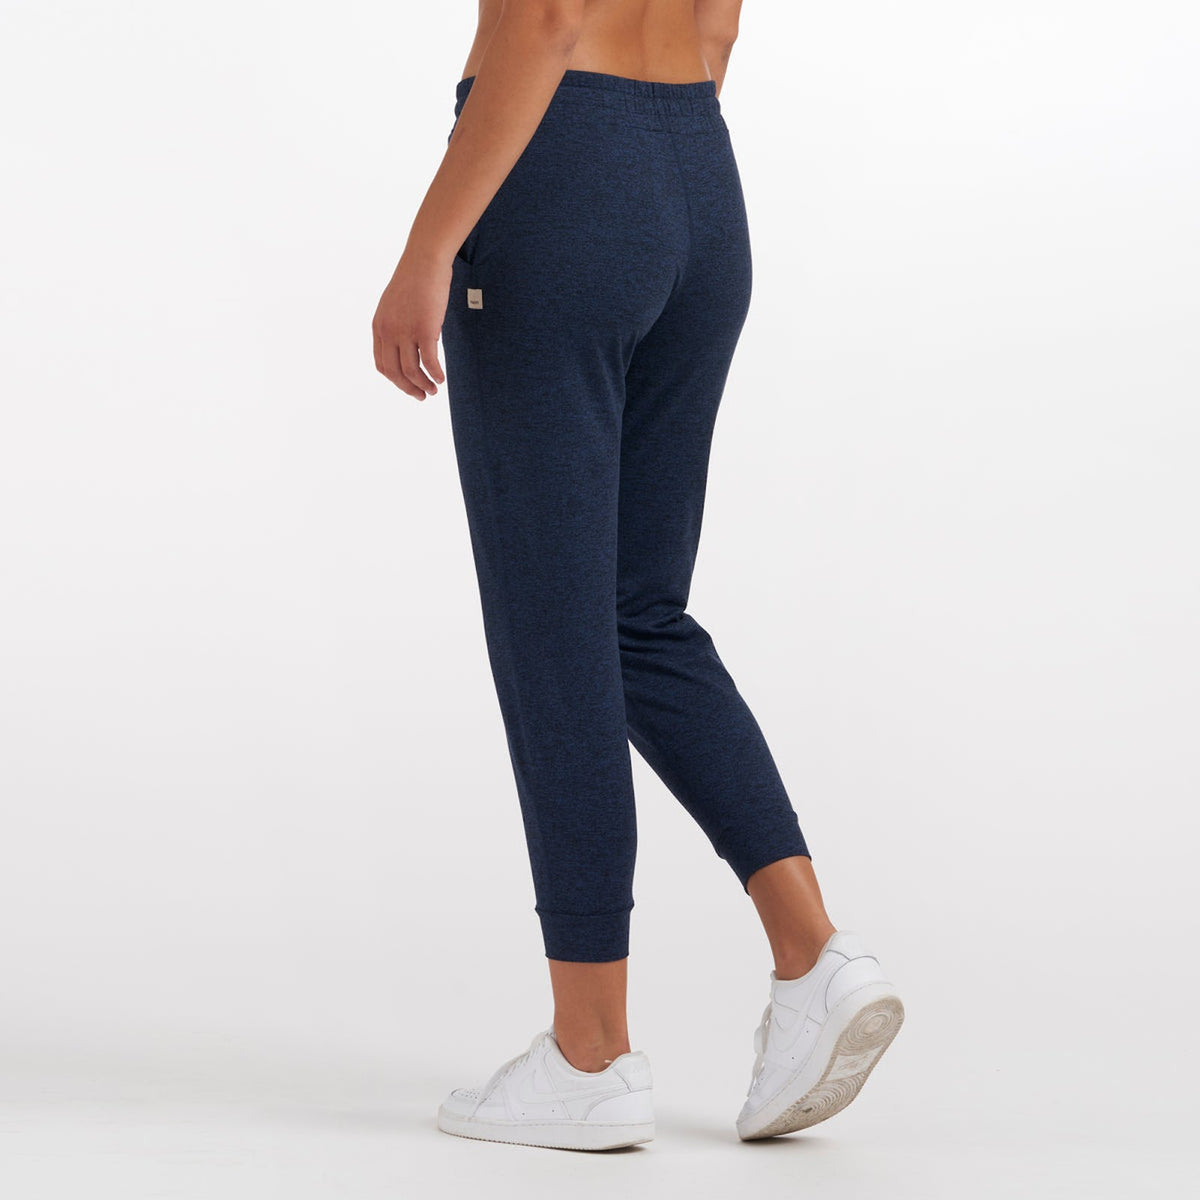 Find Your Fit: Our Best-Selling Performance Jogger